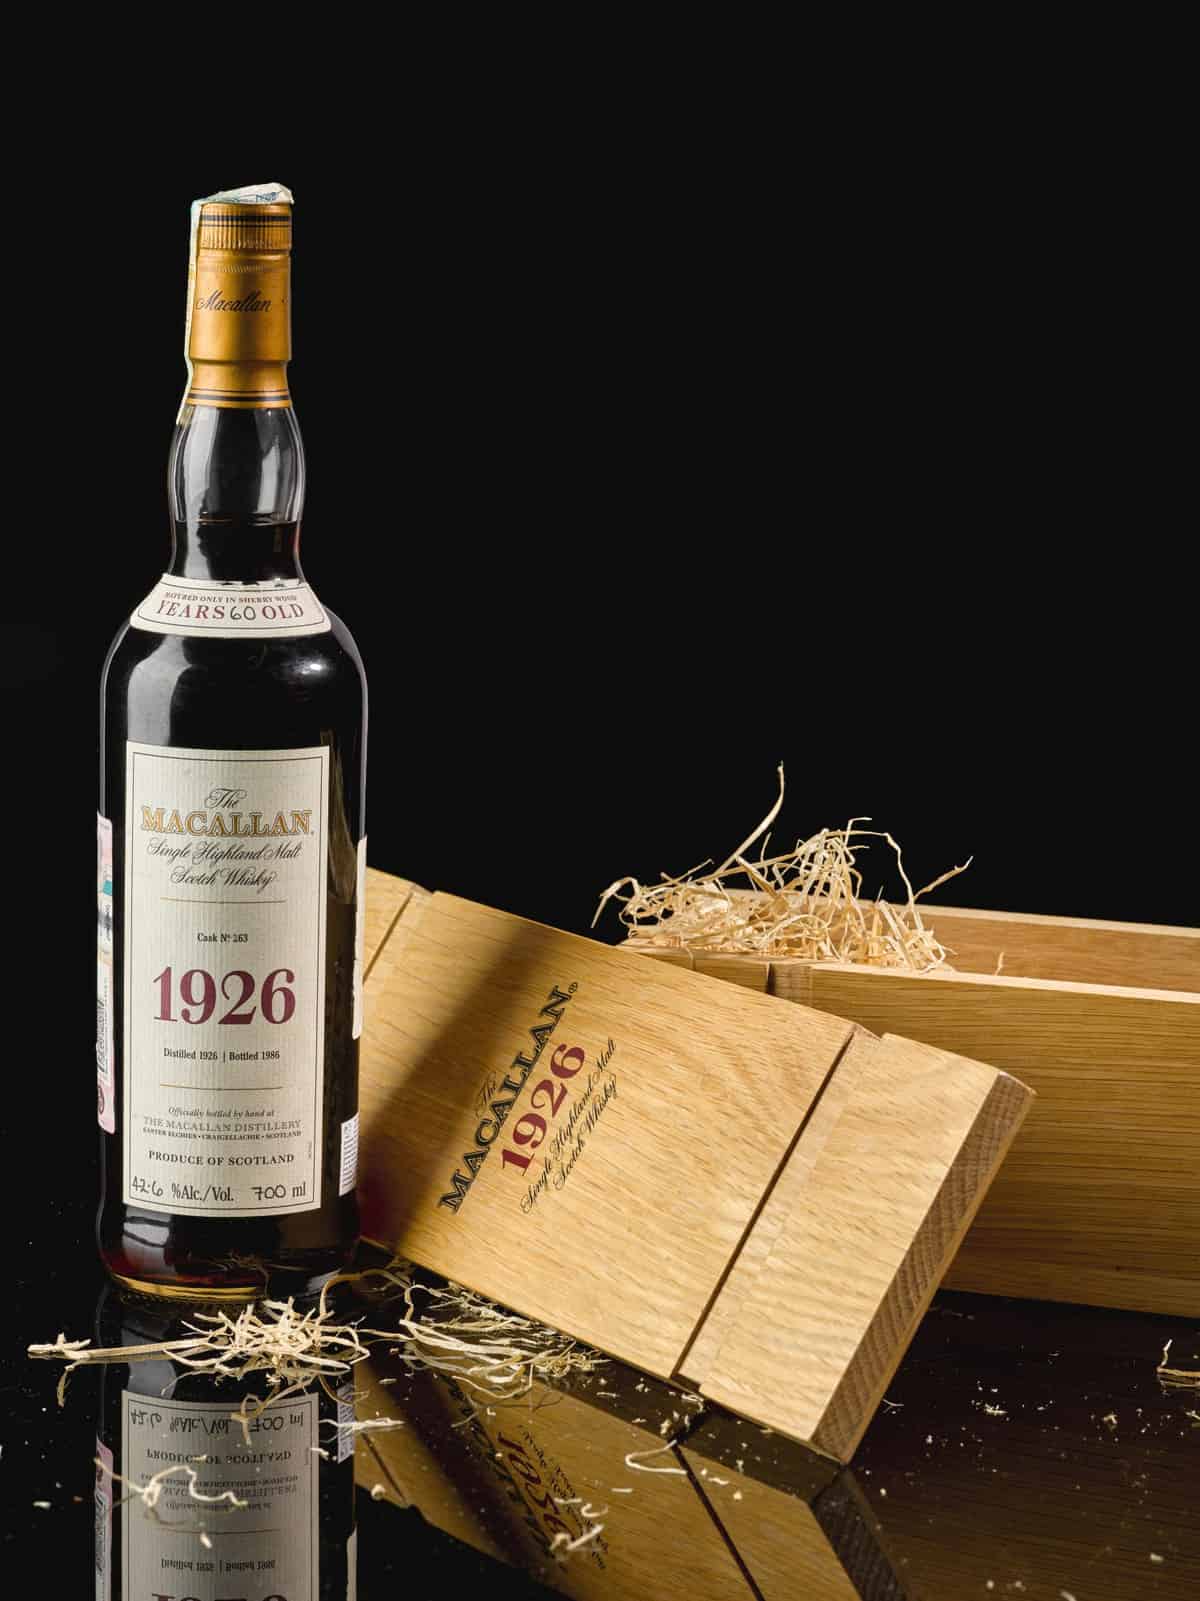 The Macallan 1926 60 Years Old